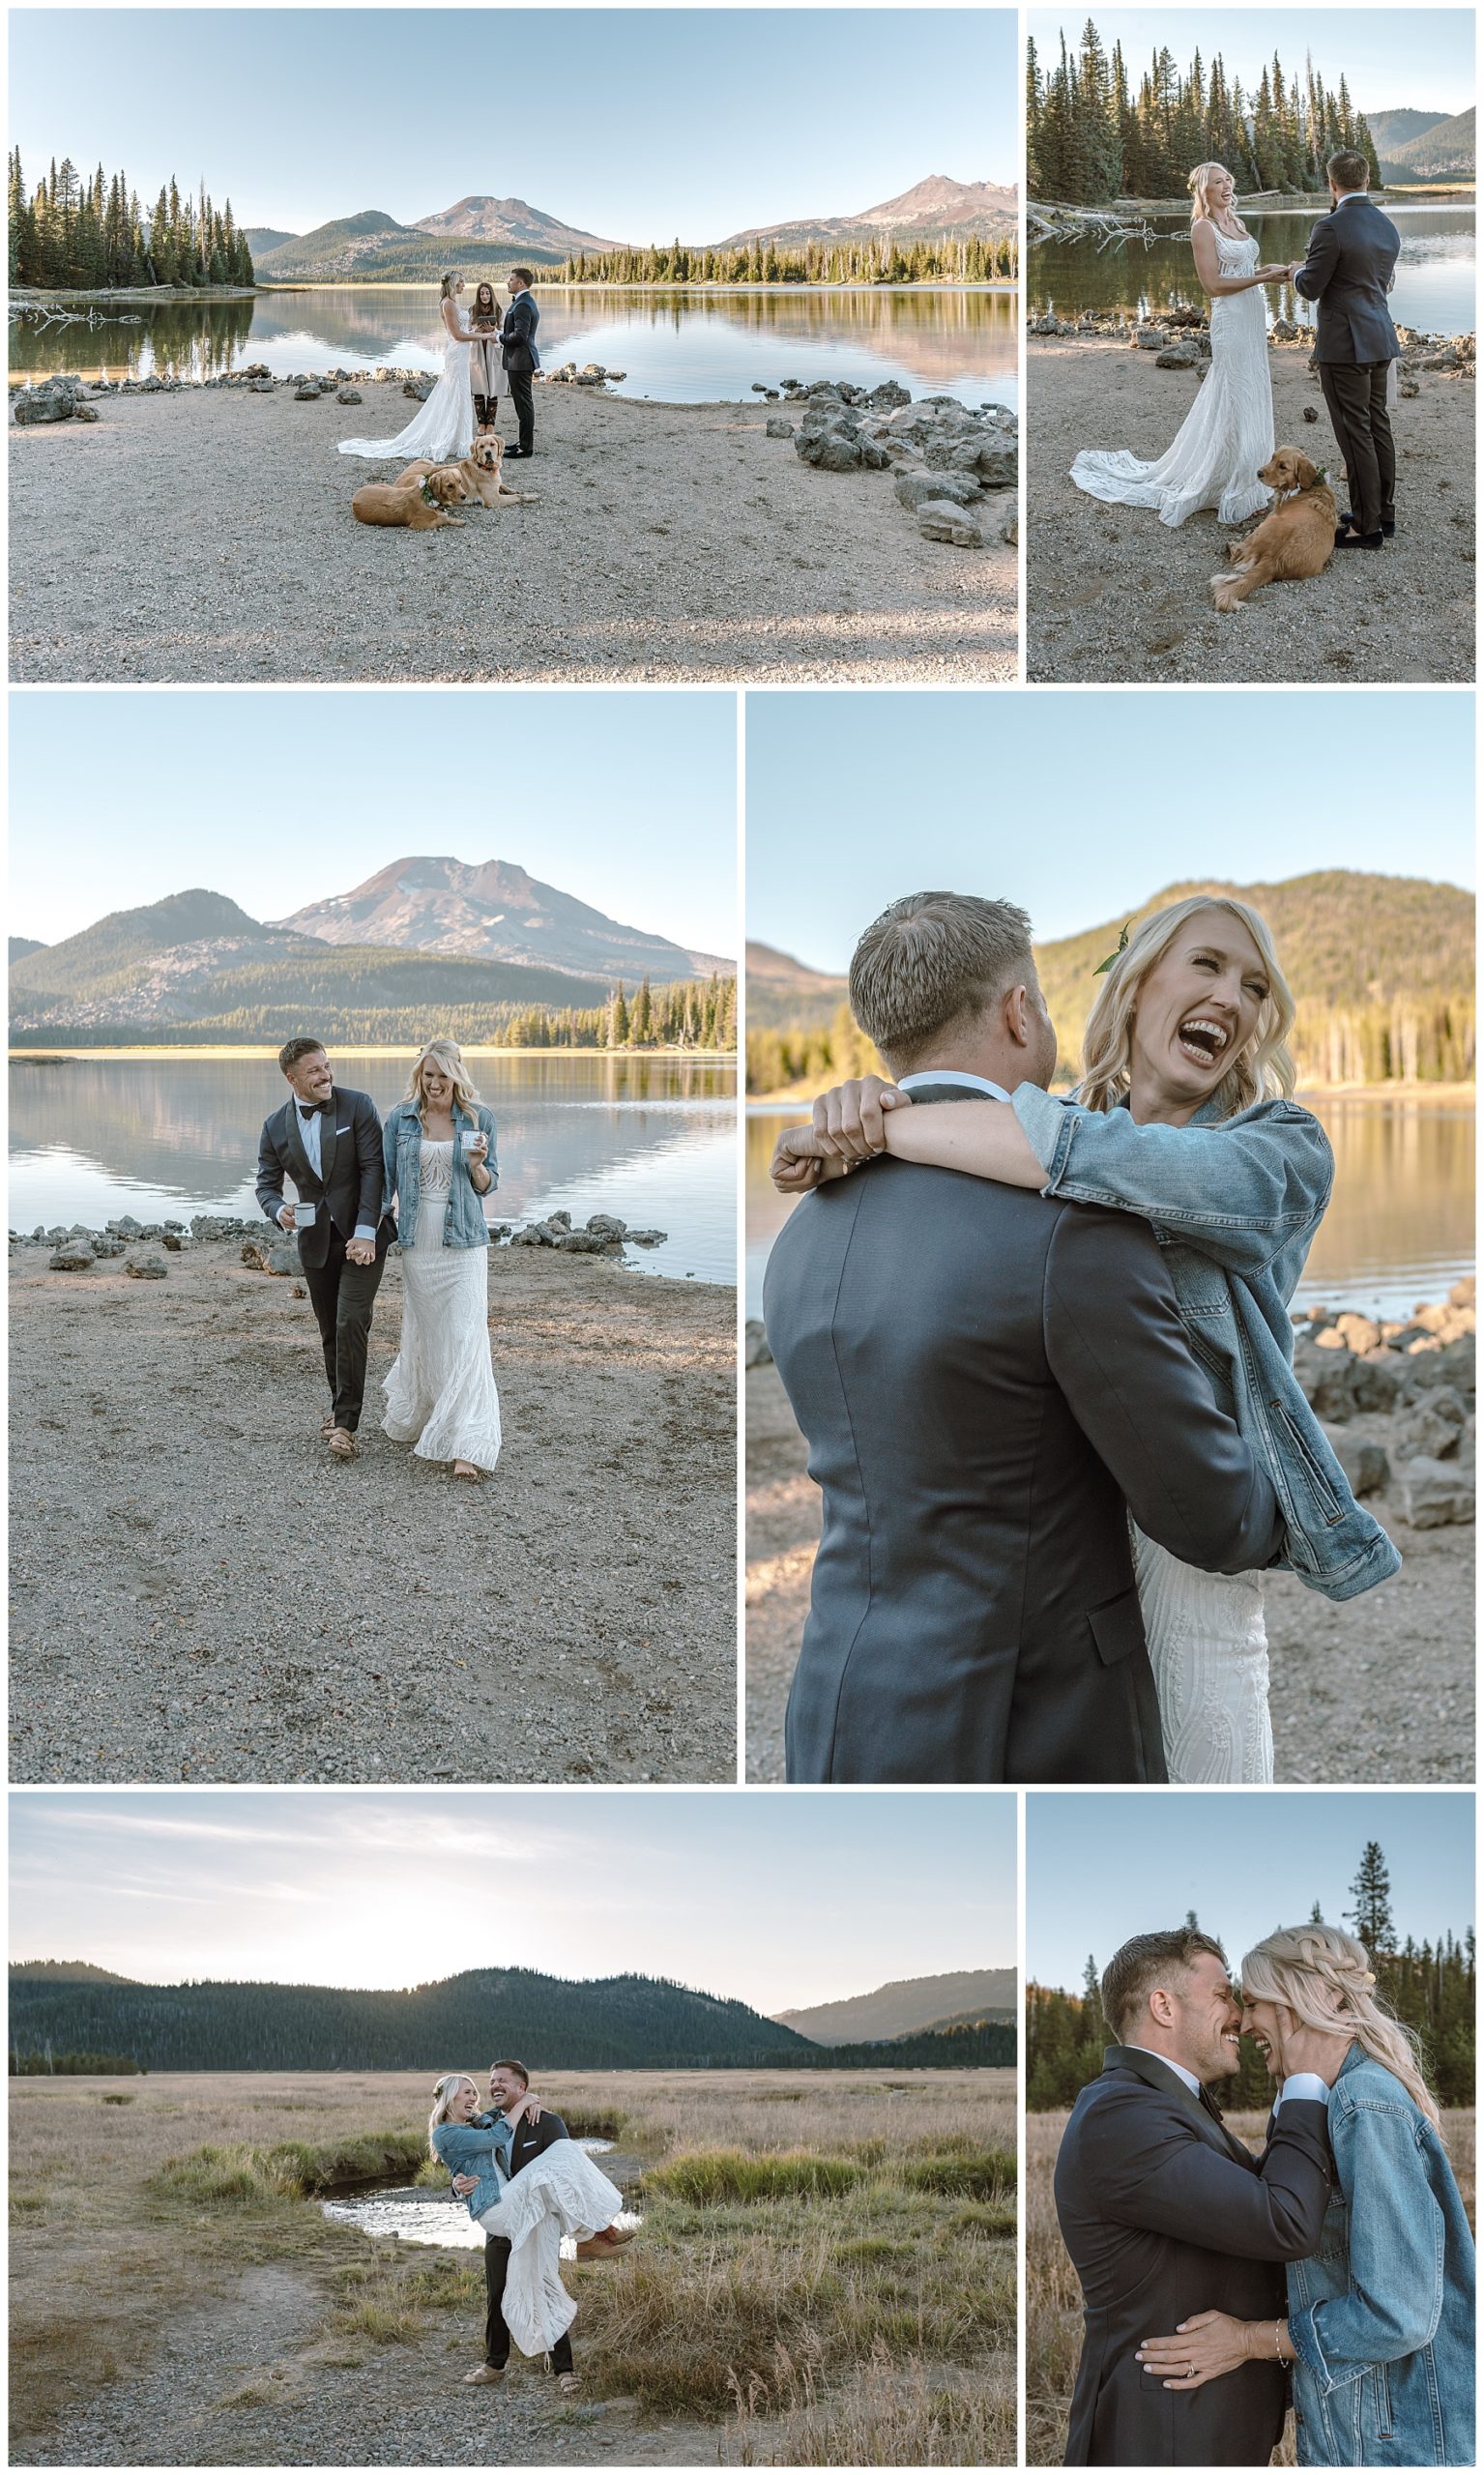 Bend is one of the best places to elope in Oregon